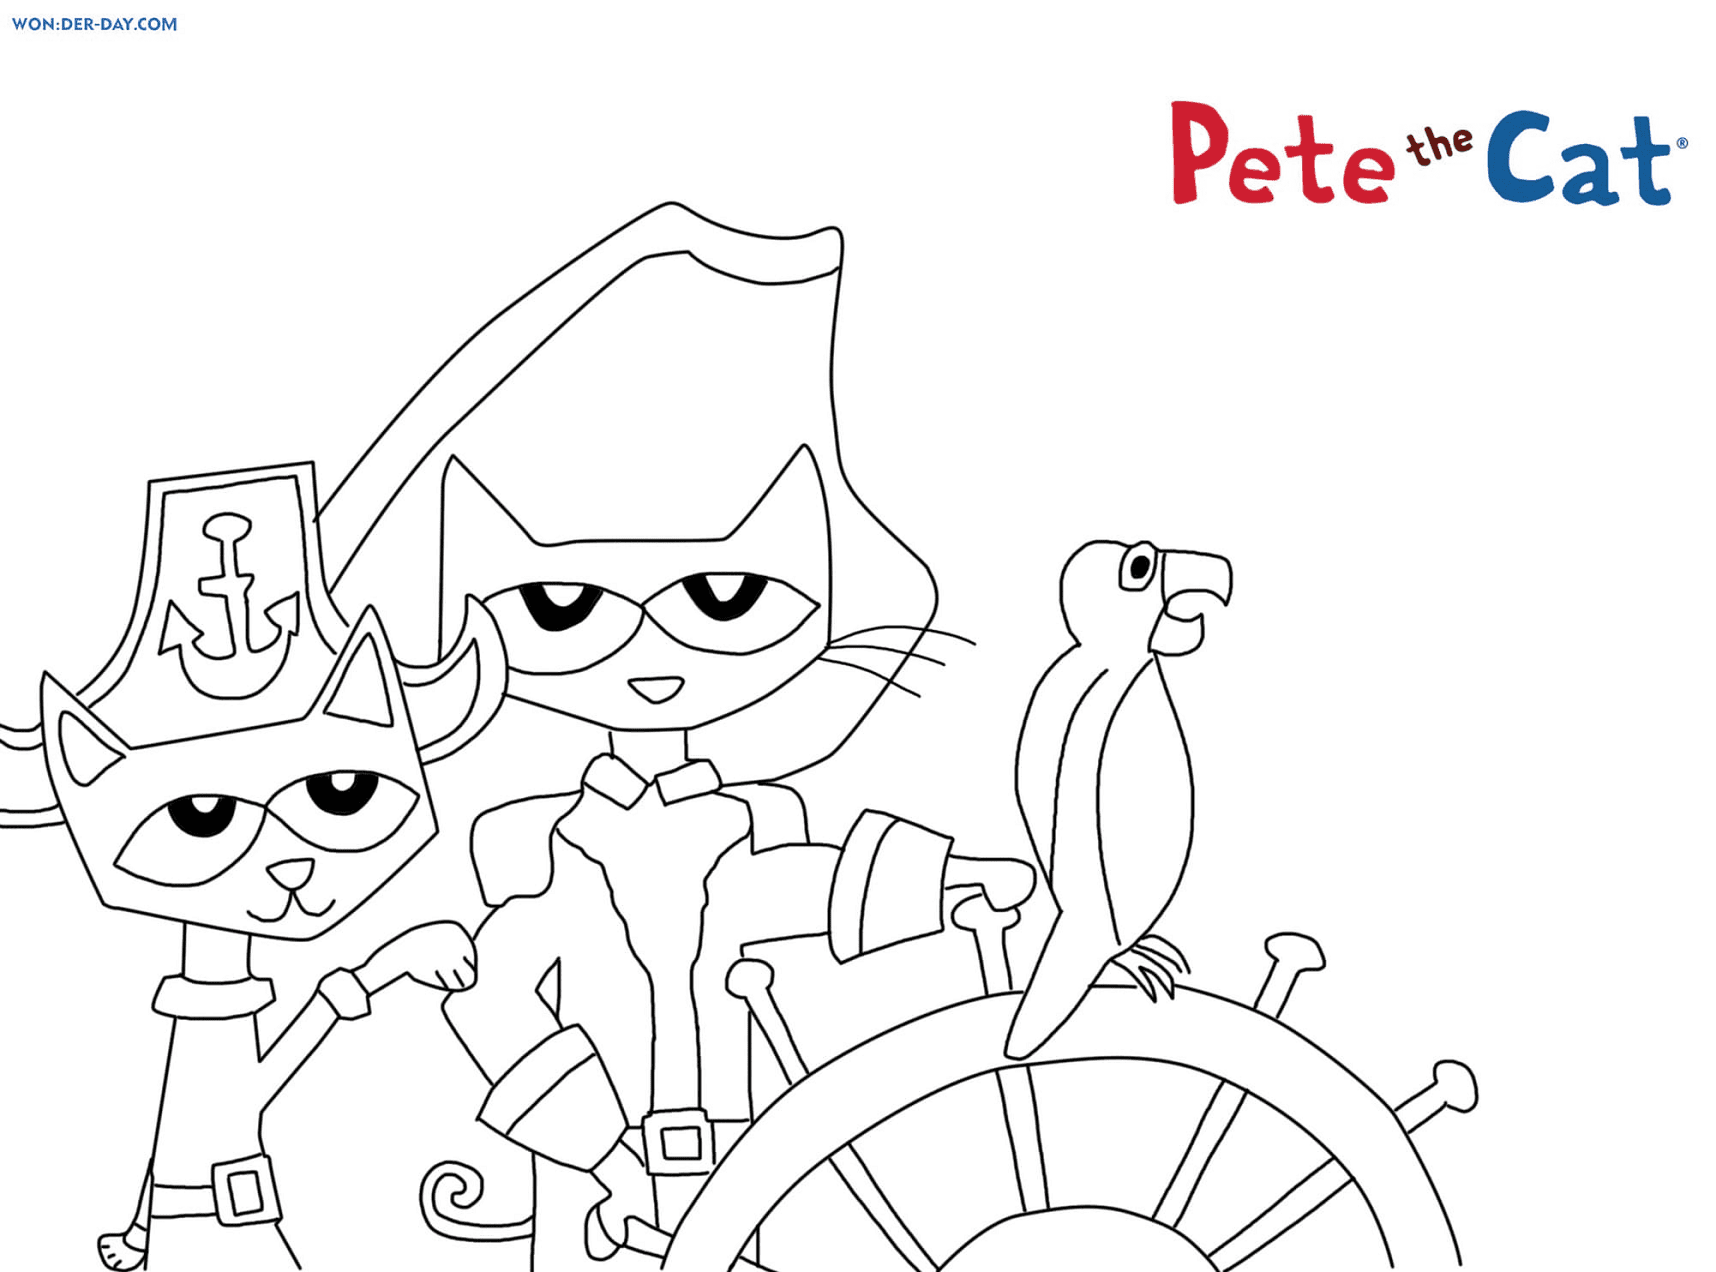 Pete the Cat Pirate Coloring Page